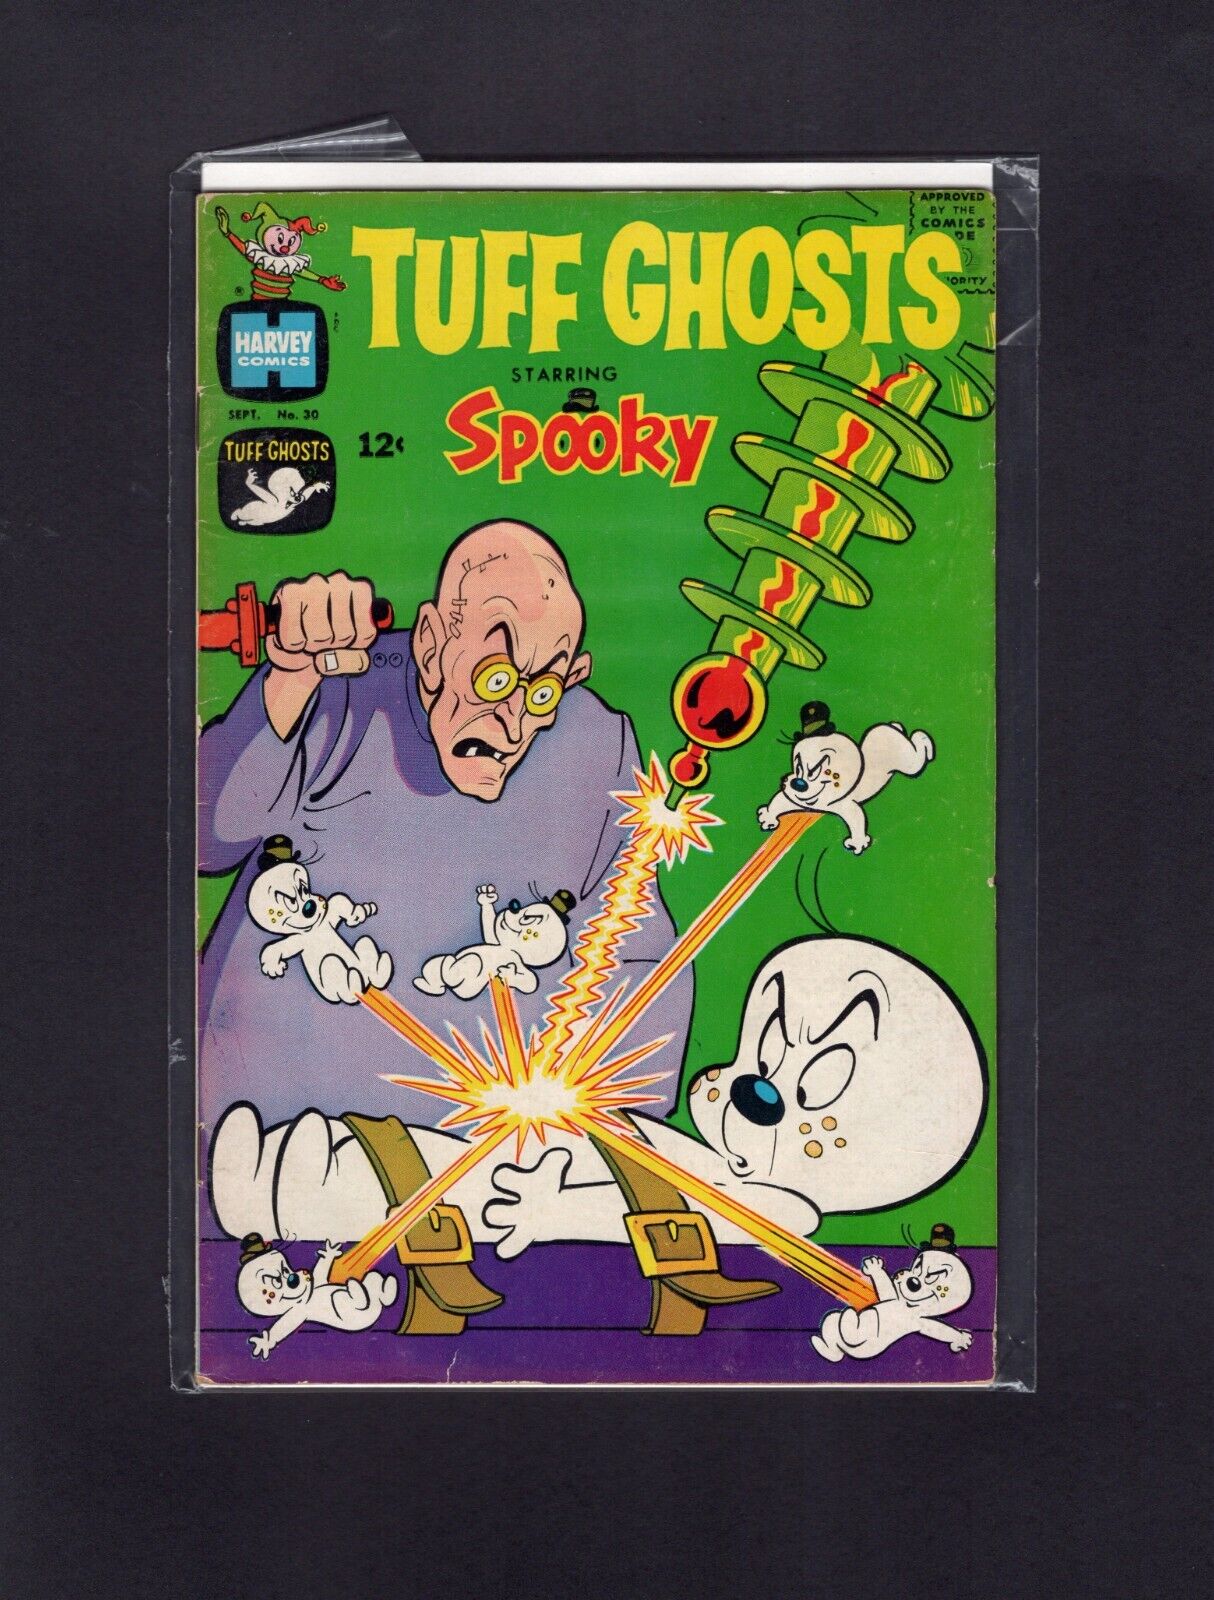 TUFF GHOSTS STARRING SPOOKY 30 HARVEY COMICS 1967 SILVER AGE VINTAGE